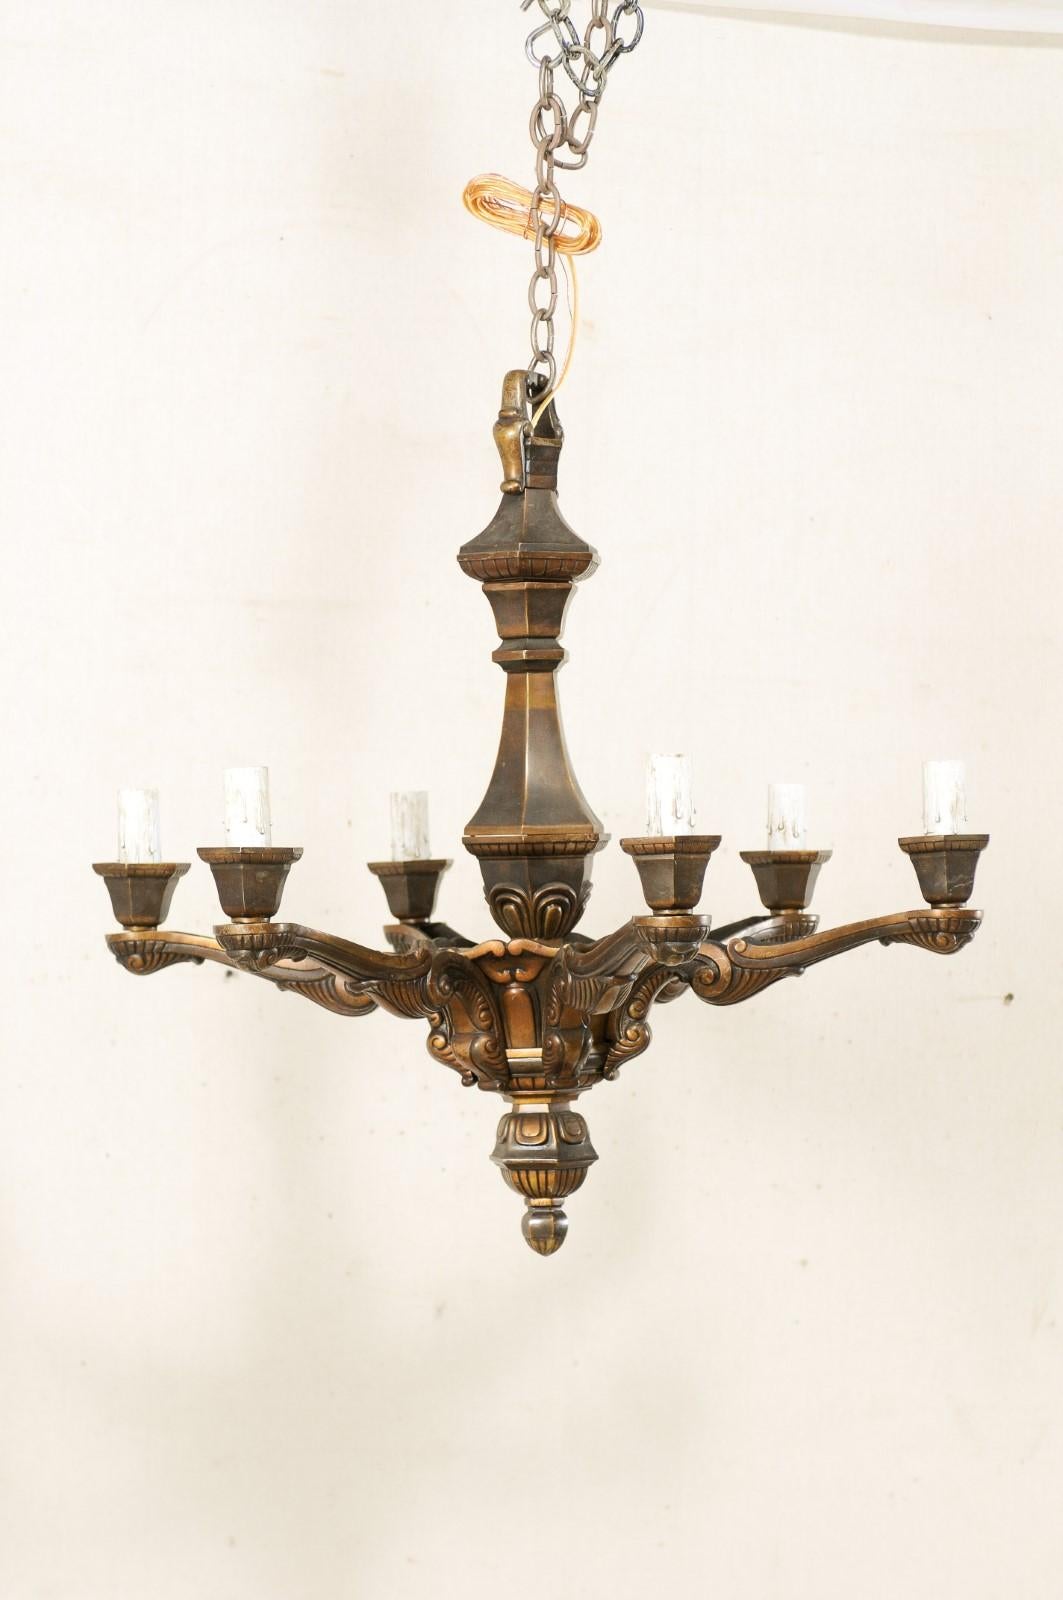 A French bronze chandelier with six-light from the mid-20th century. This vintage chandelier from France features a dark, nicely patinated and heavy bronze body. The central gallery supports the six arms, projecting outward in a circular fashion,